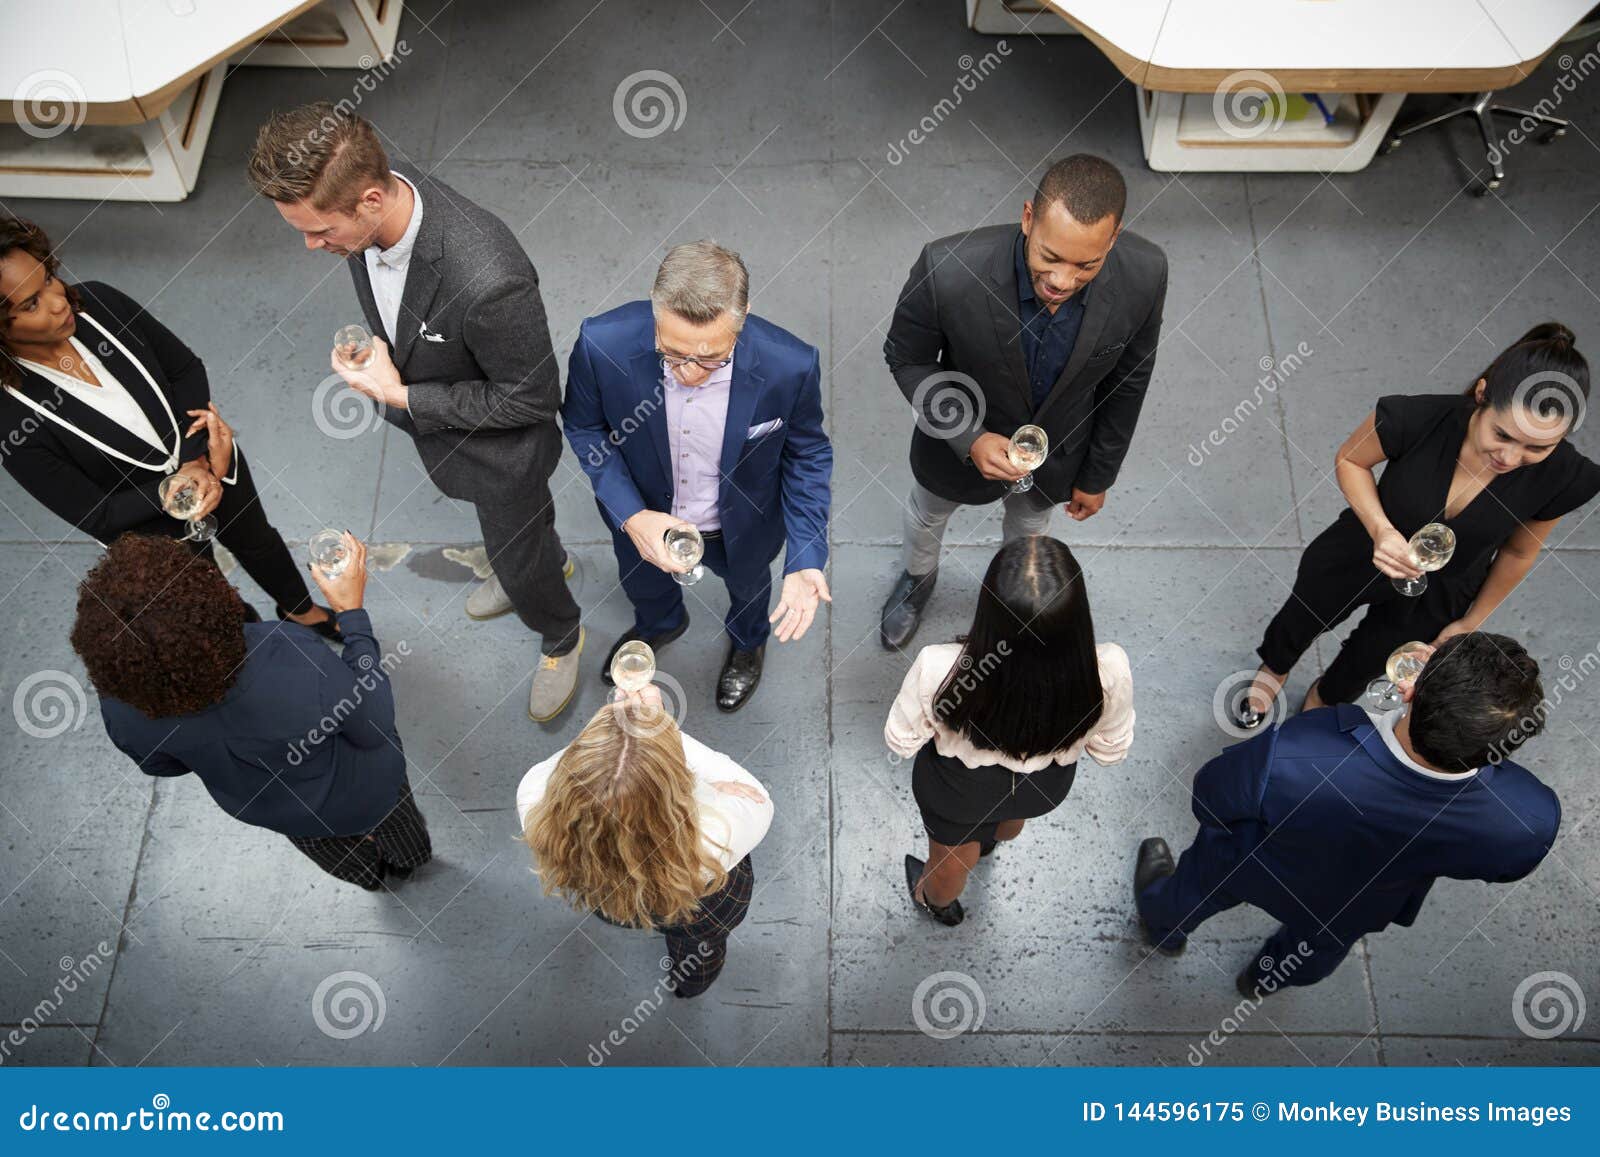 overhead shot of business team socializing at after works drinks in modern office